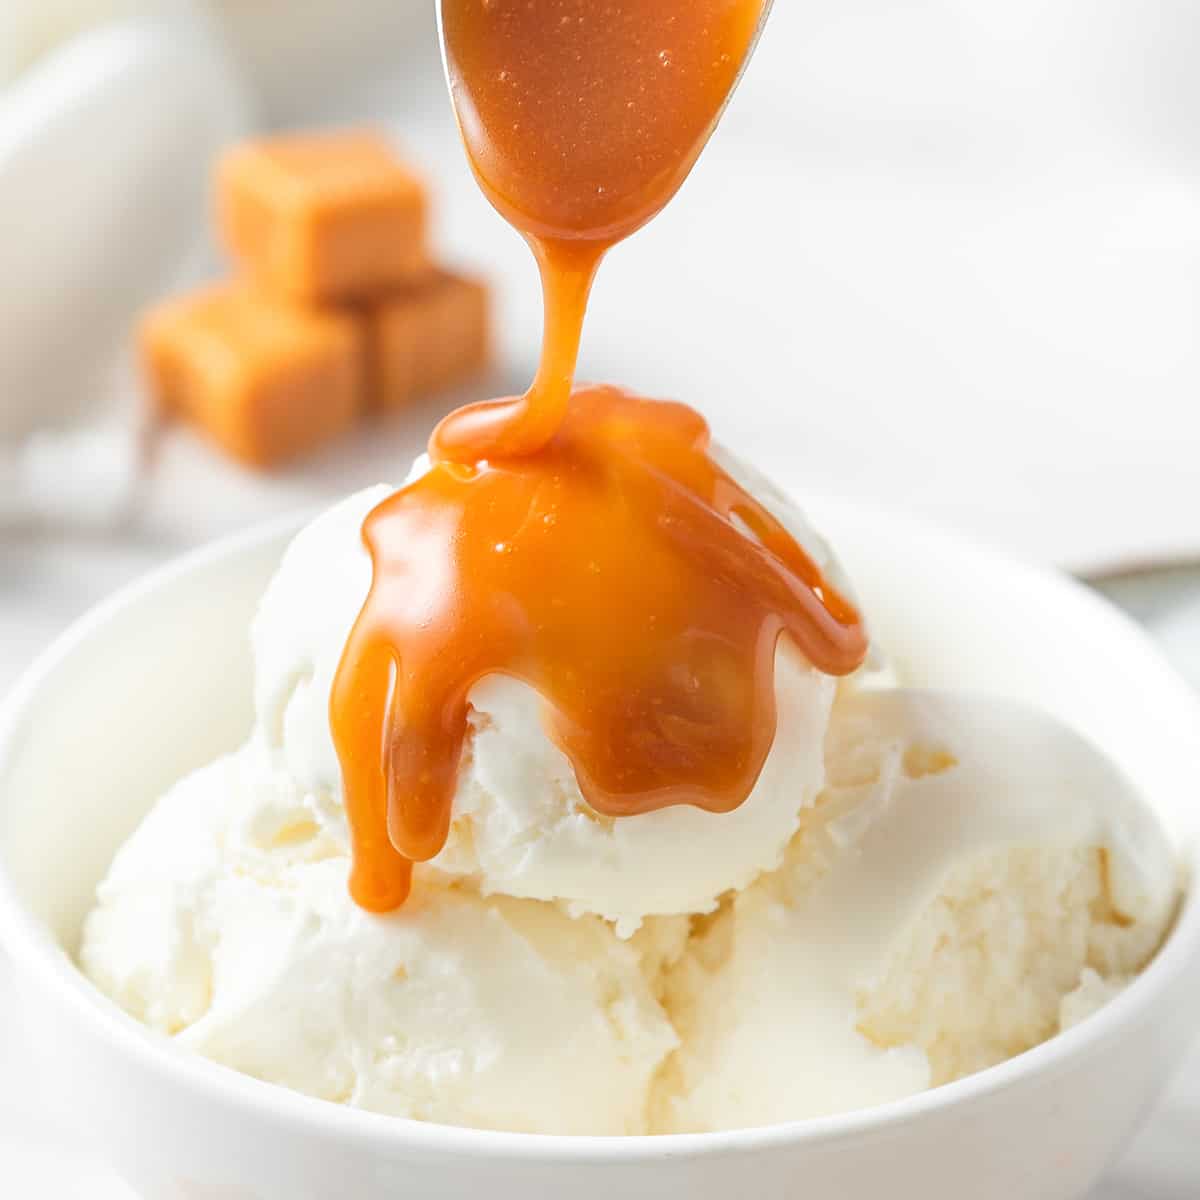 homemade caramel sauce being poured over vanilla ice cream in a bwol